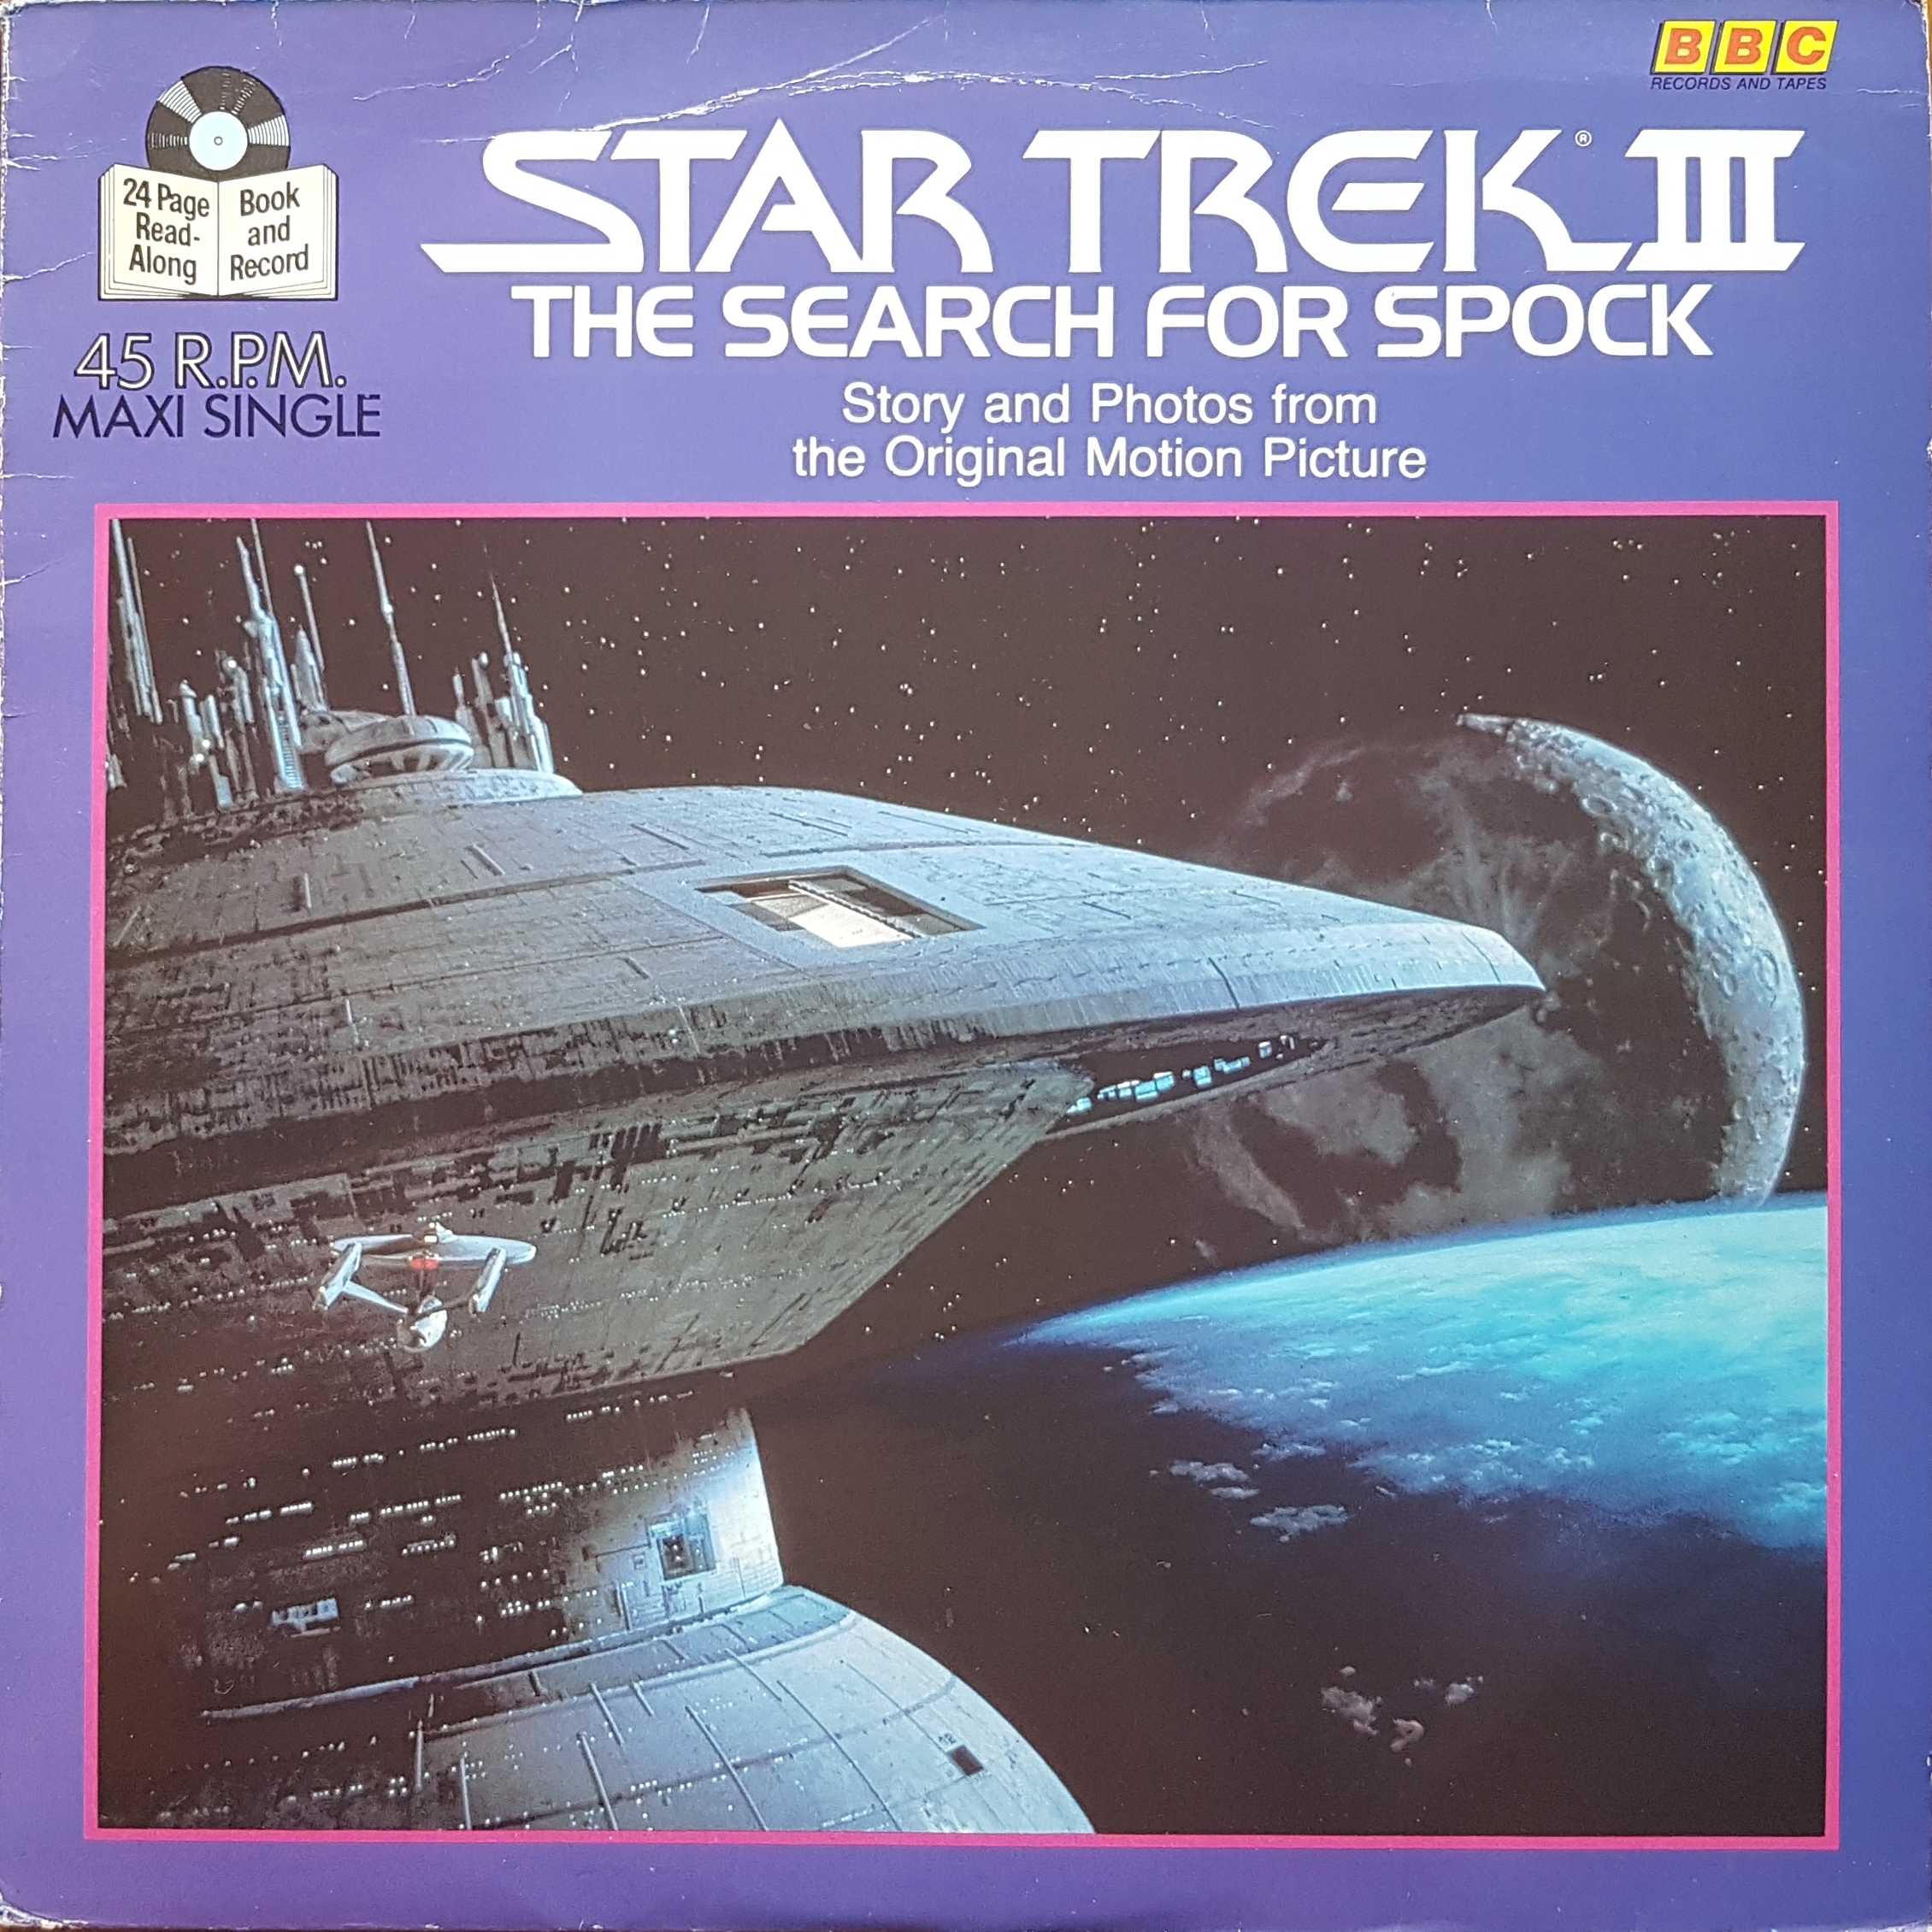 Picture of RESLD 002 Star trek III - The search for Spock (Includes book) by artist Unknown from the BBC 12inches - Records and Tapes library